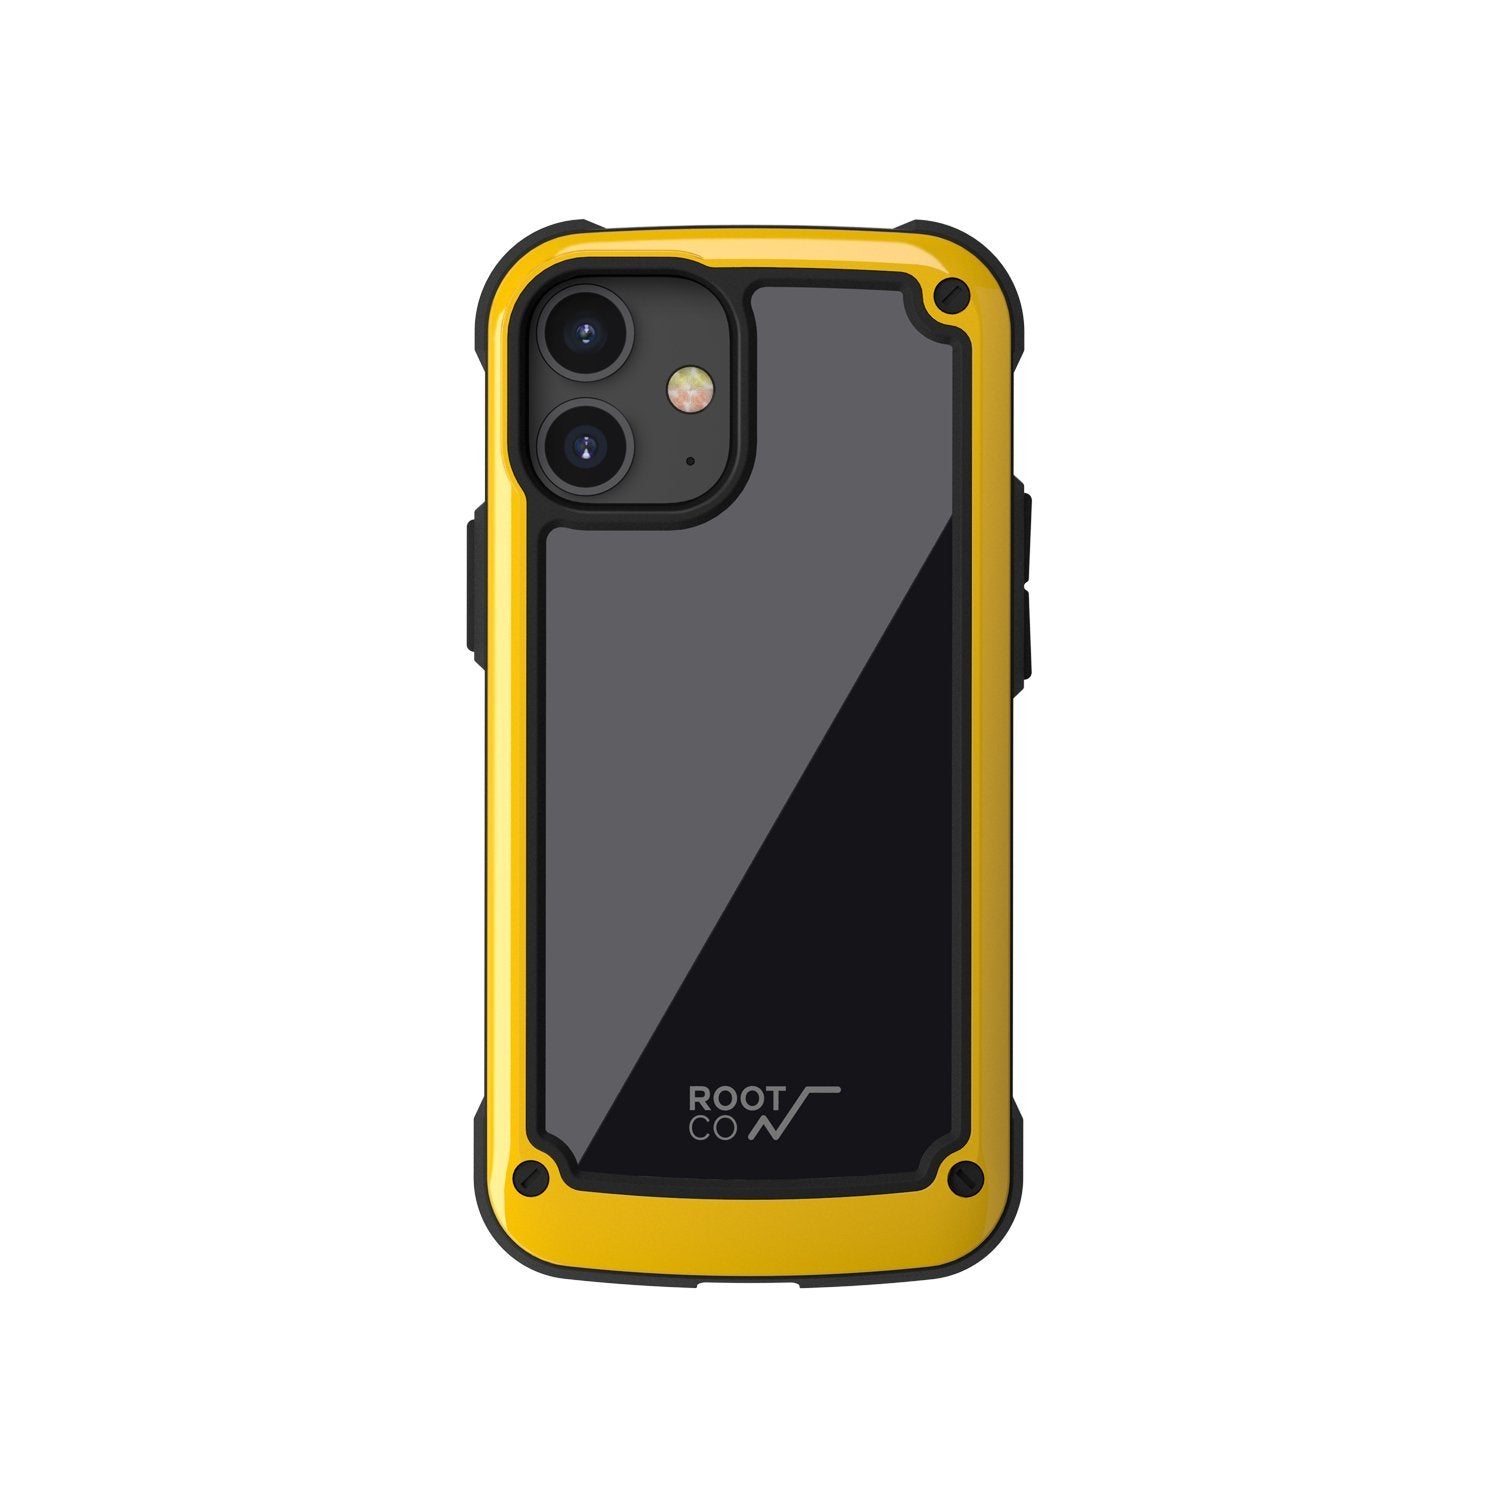 ROOT CO. Gravity Shock Resist Tough & Basic Case for iPhone 12 mini 5.4"(2020), Yellow Default ROOT CO. 